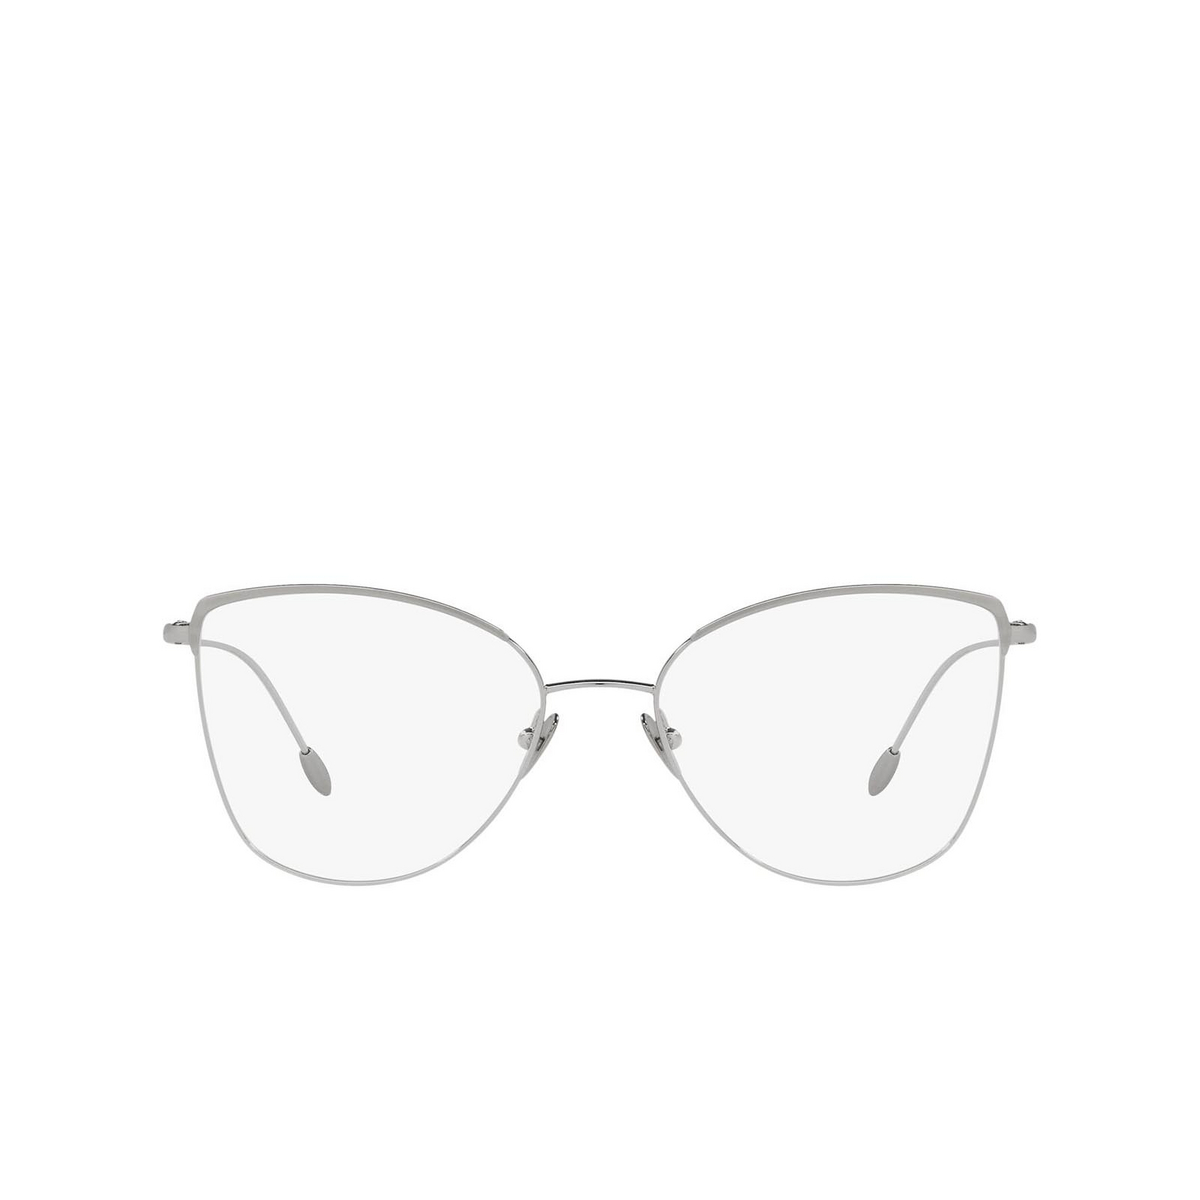 Giorgio Armani® Butterfly Eyeglasses: AR5110 color Matte/shiny Silver 3015 - front view.